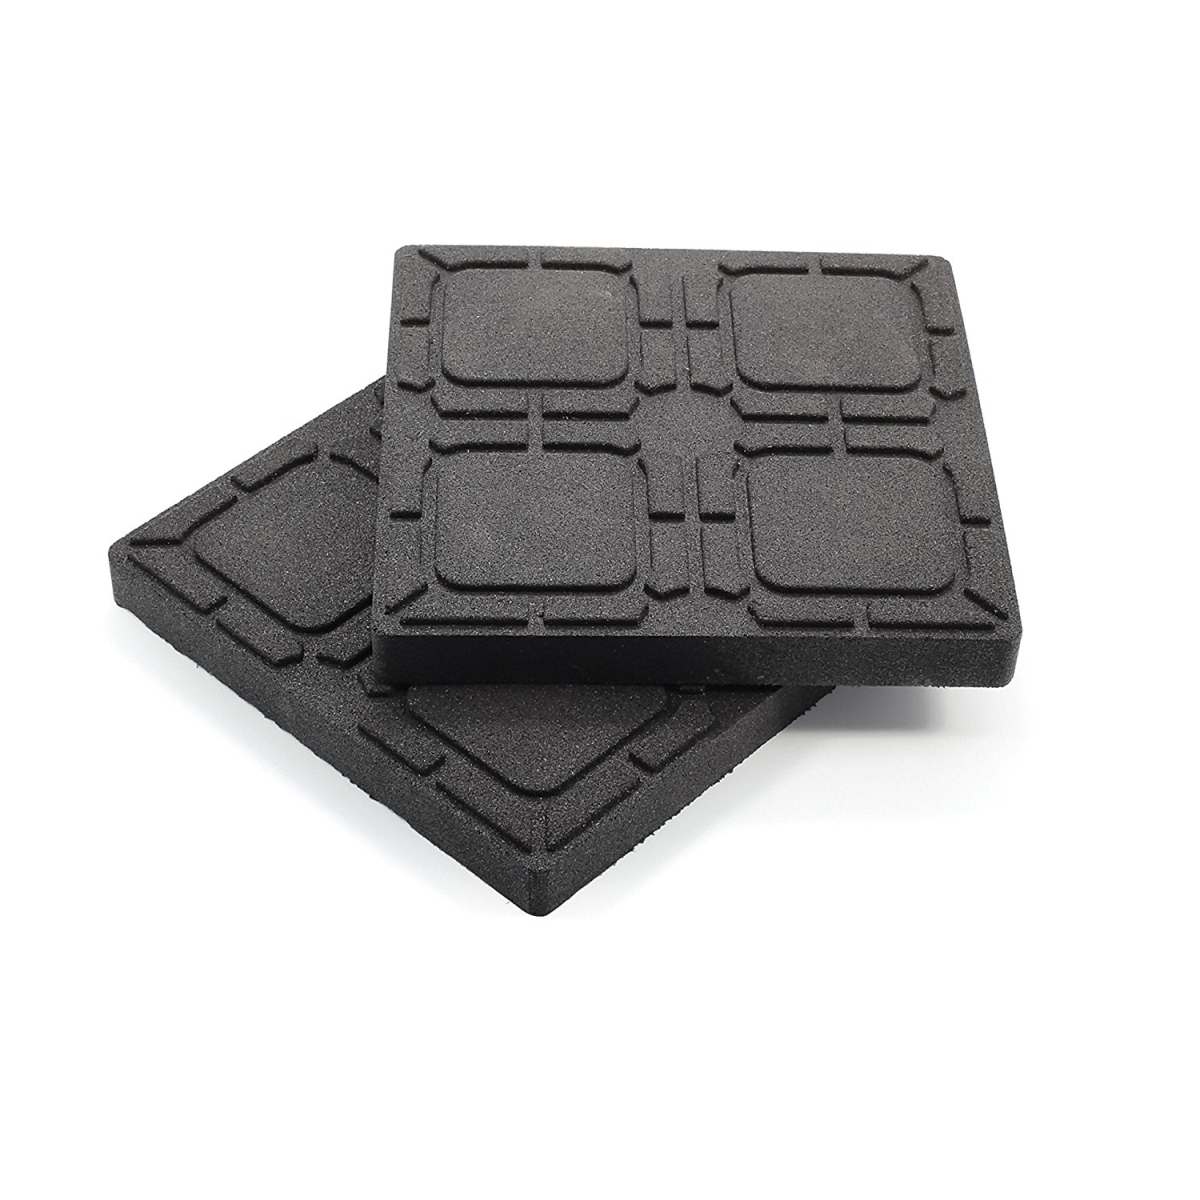 Picture of Camco C1W-44600 Universal Flex Non-Slip Pads for Leveling Blocks